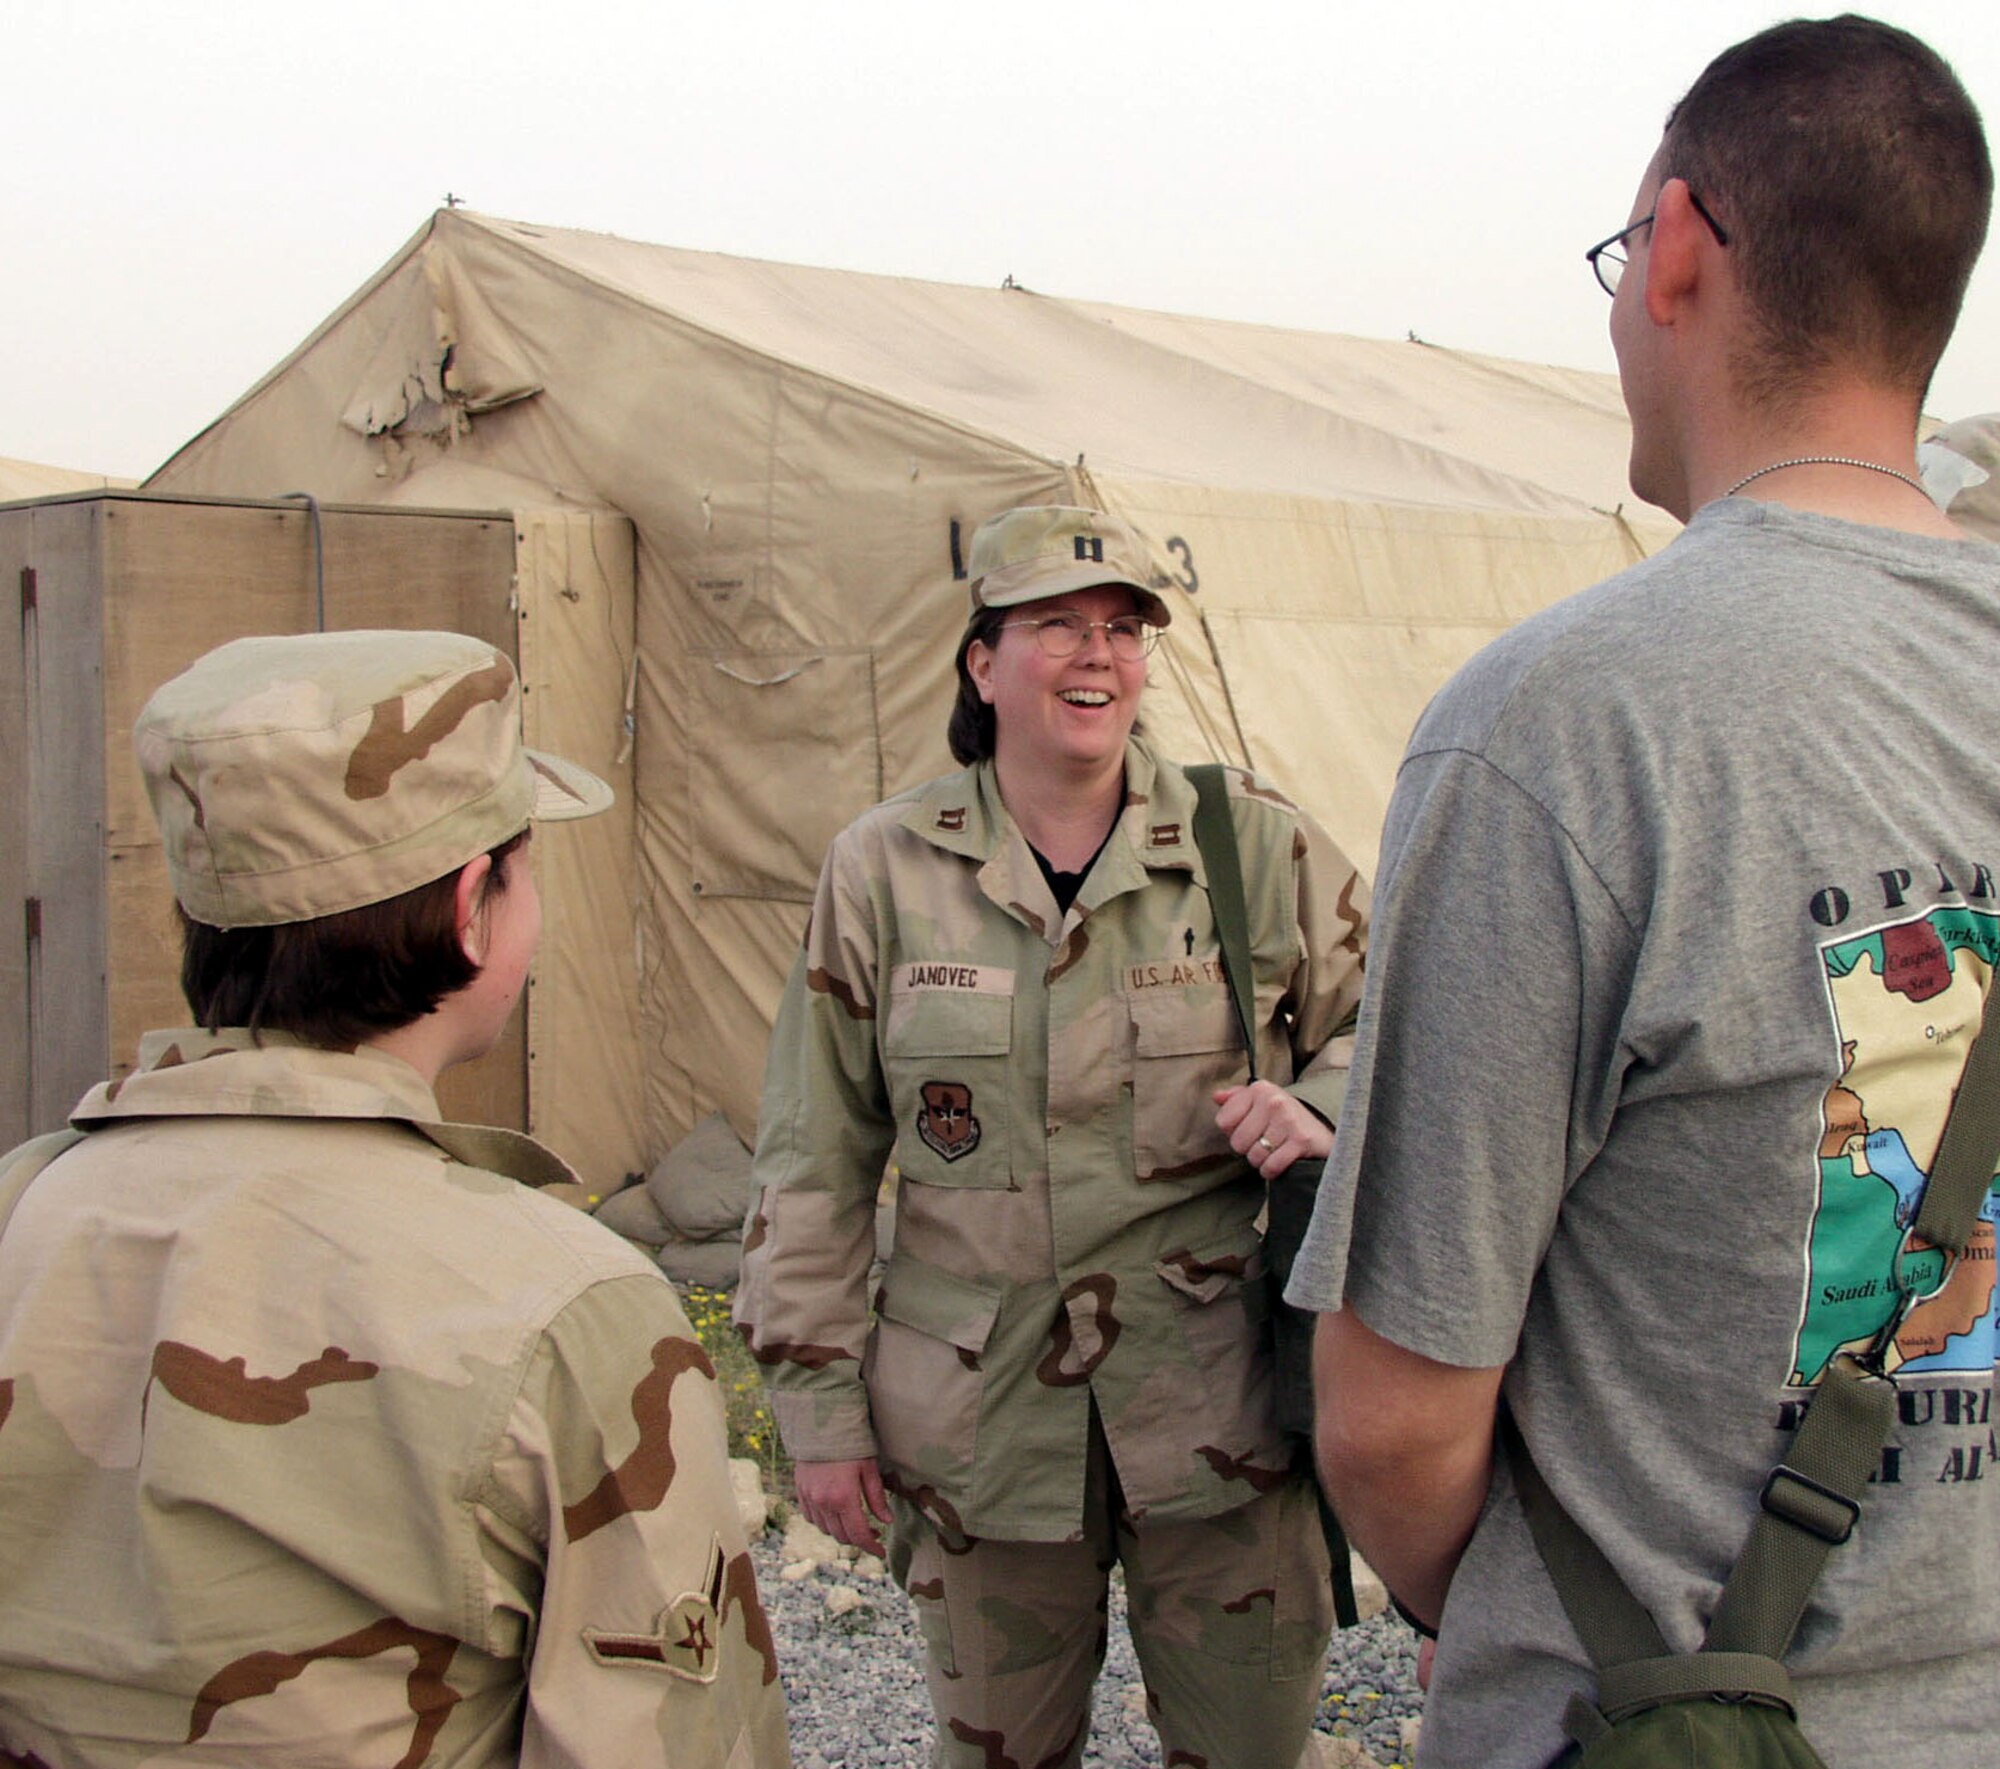 OPERATION SOUTHERN WATCH -- Chaplain (Capt.) Leslie Janovec, a Protestant chaplain assigned to the 386th Air Expeditionary Wing, visits tent city residents at her forward-deployed location in the Arabian Gulf region. Janovec recently deployed to the region from her home station at Lackland Air Force Base, Texas. (U.S. Air Force photo by Tech. Sgt. Dan Neely)